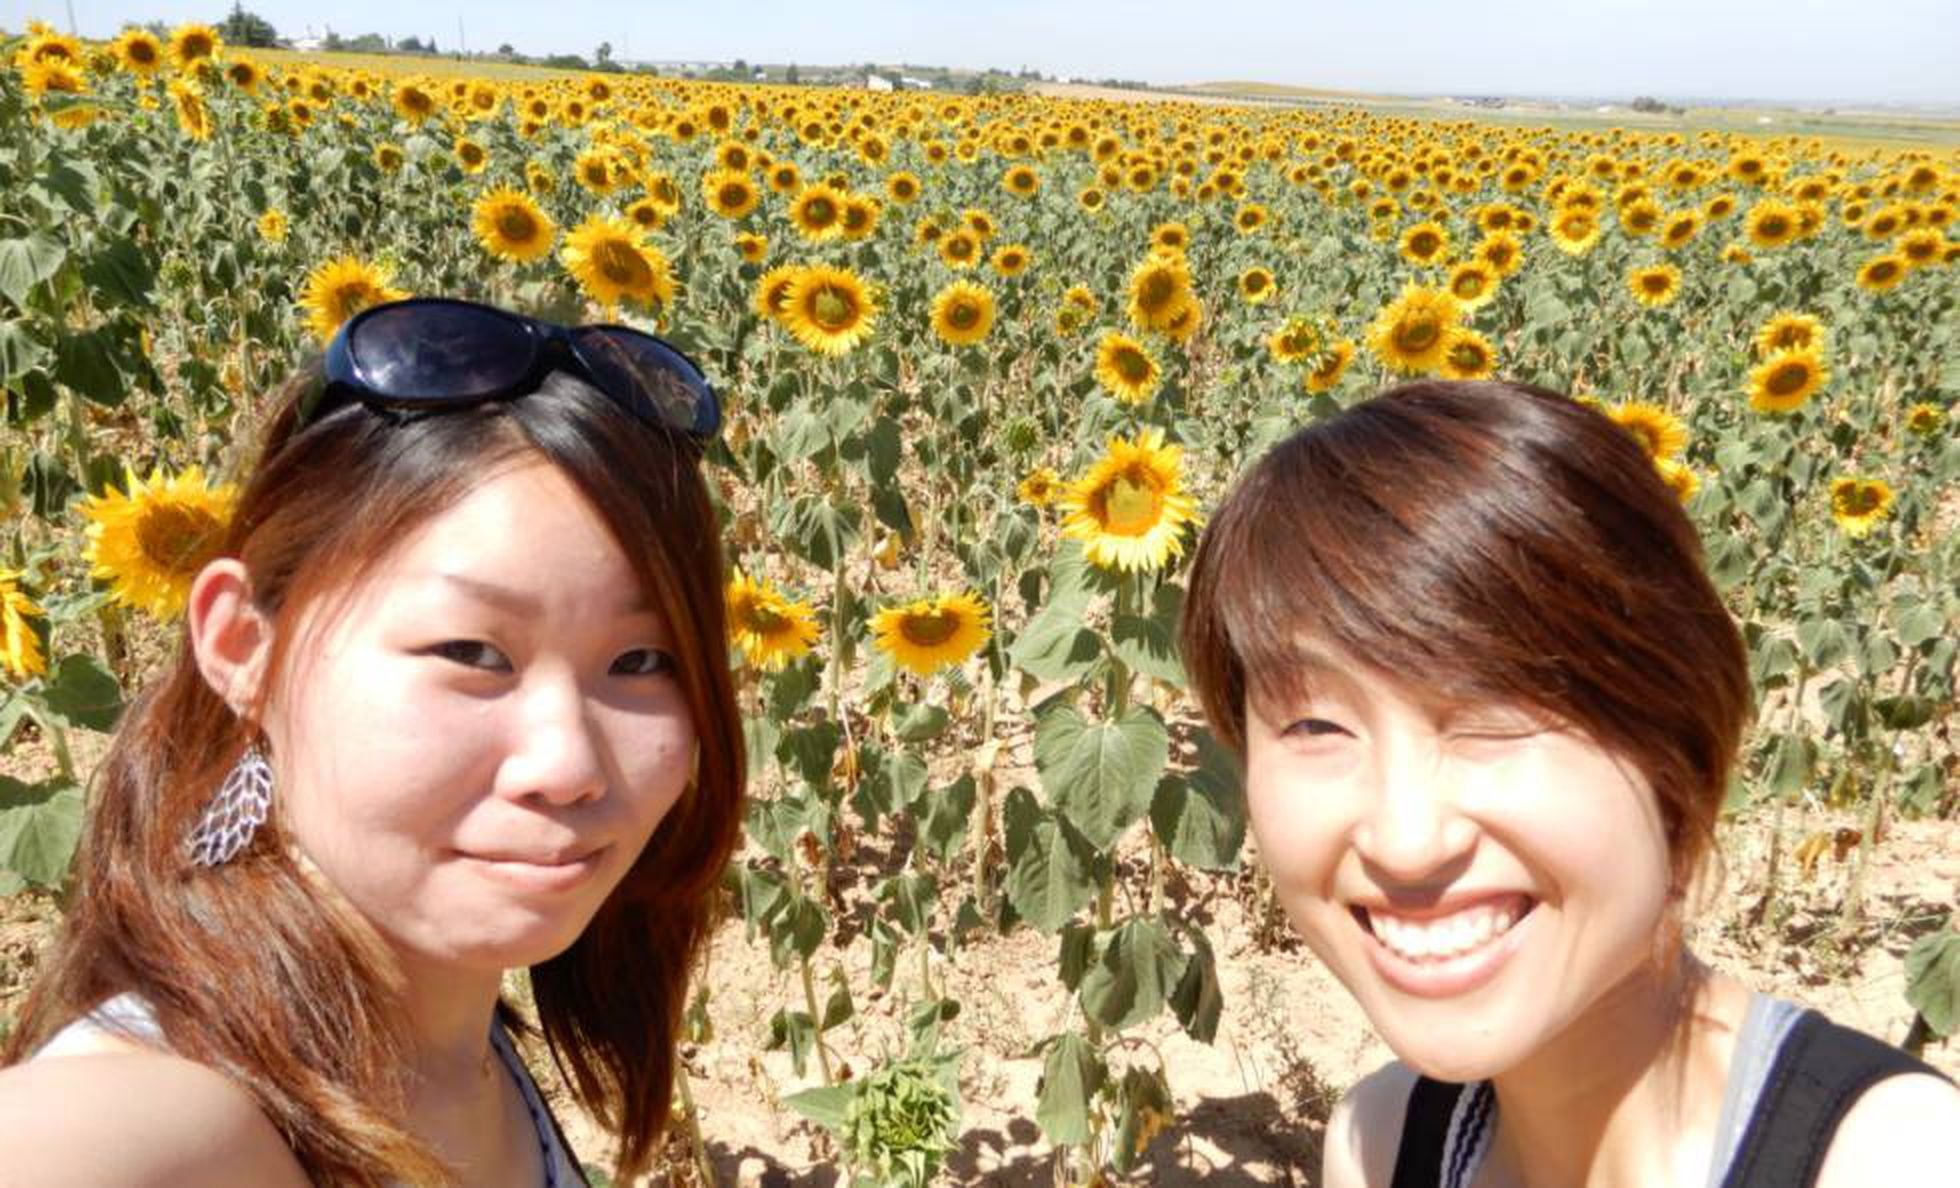 The sunflower fields of Carmona, Spain: Why are the Japanese so obsessed  with Spain's sunflowers? | Economy and Business | EL PAÍS English